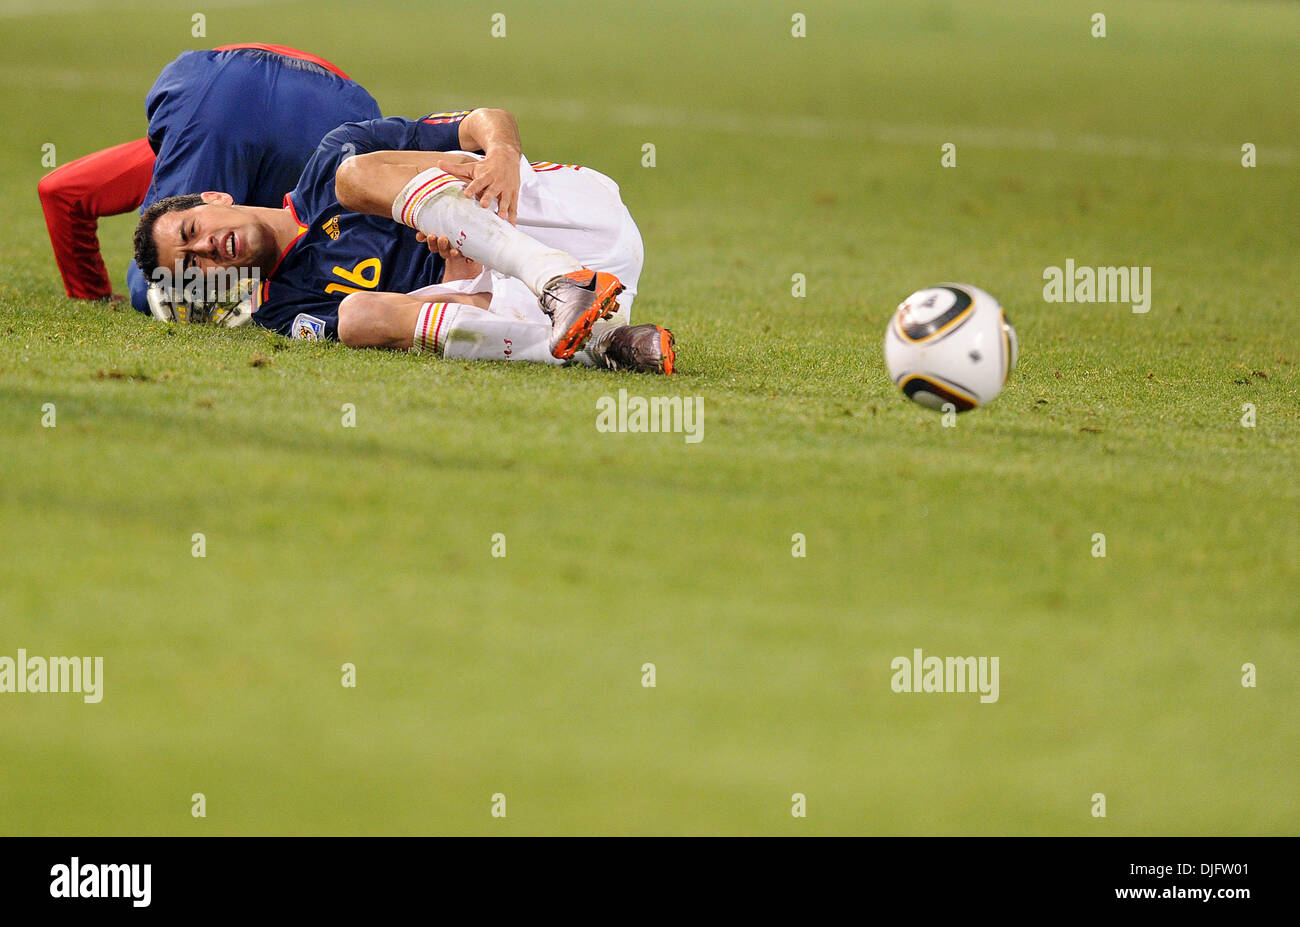 June 25, 2010 - Pretoria, South Africa - Sergio Busquets of Spain falls on the pitch during the 2010 FIFA World Cup soccer match between Chile and Spain at Loftus Versfeld Stadium on June 25, 2010 in Pretoria, South Africa. (Credit Image: © Luca Ghidoni/ZUMApress.com) Stock Photo